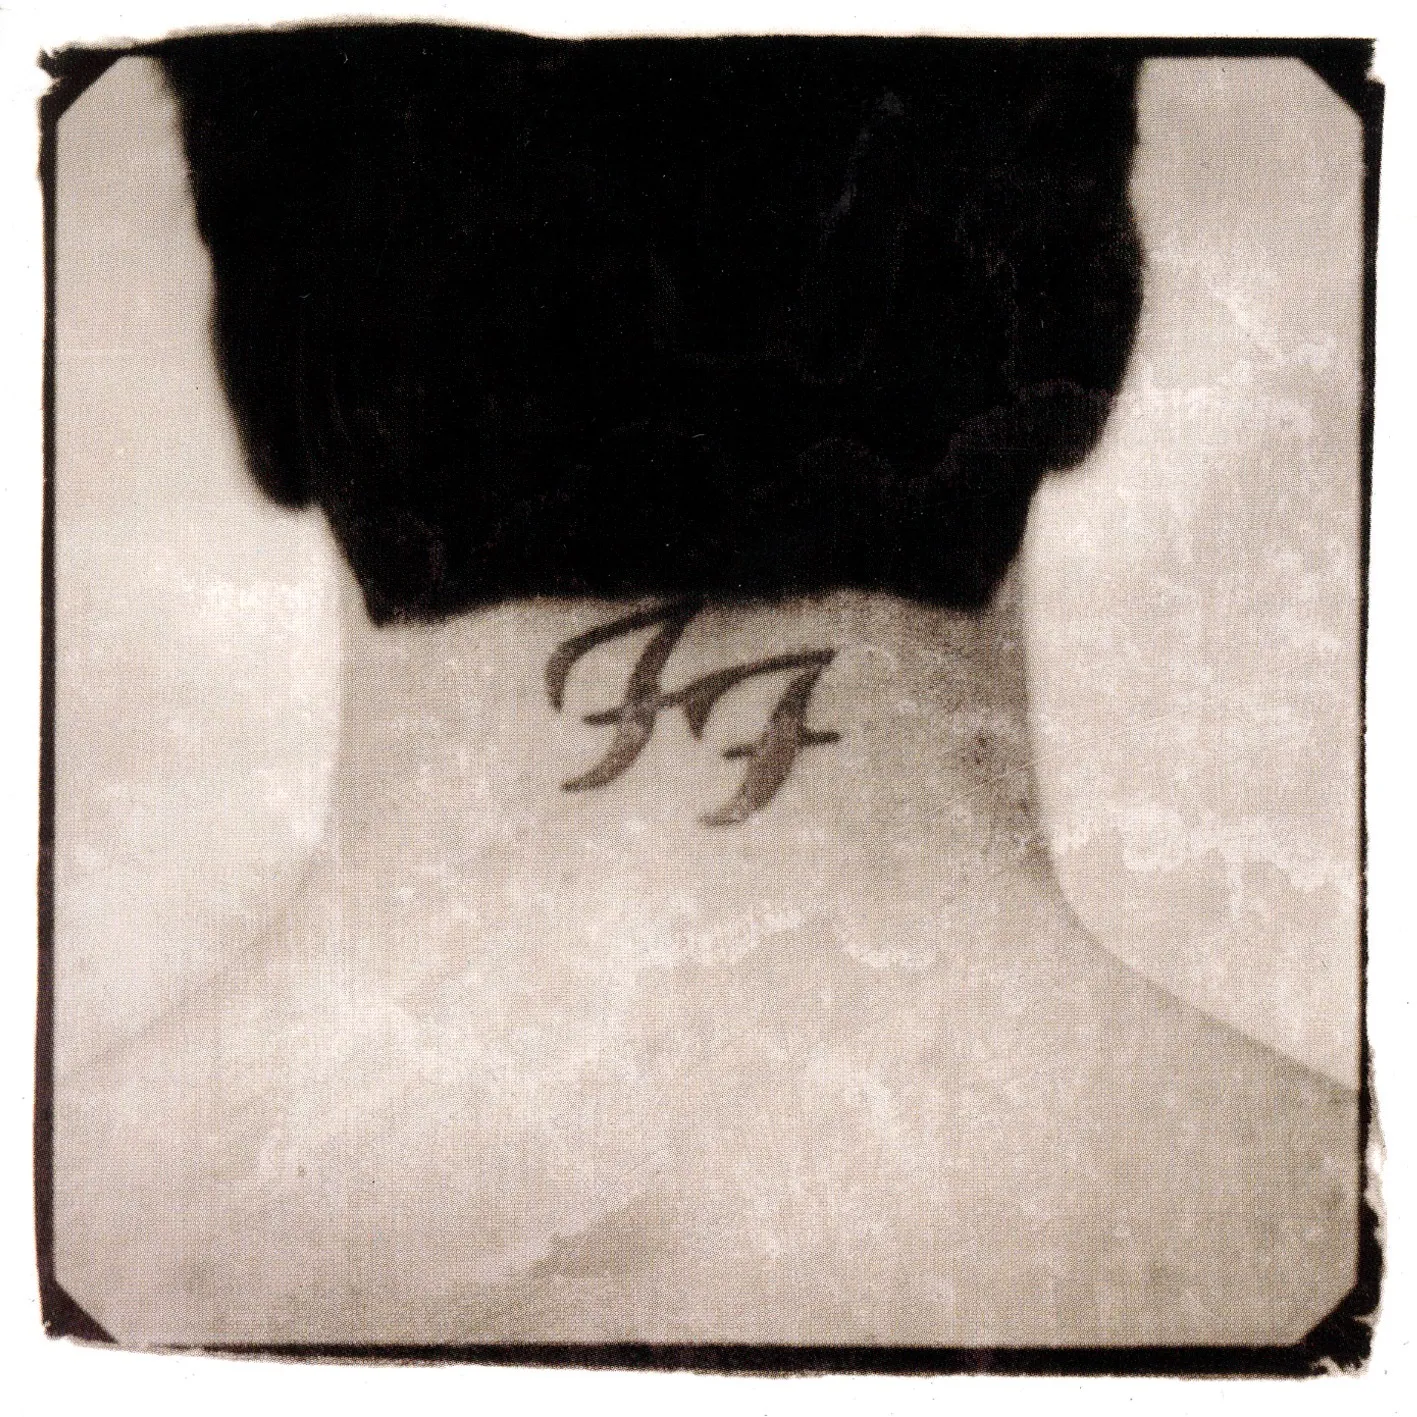 Foo Fighters - There Is Nothing Left To Lose artwork